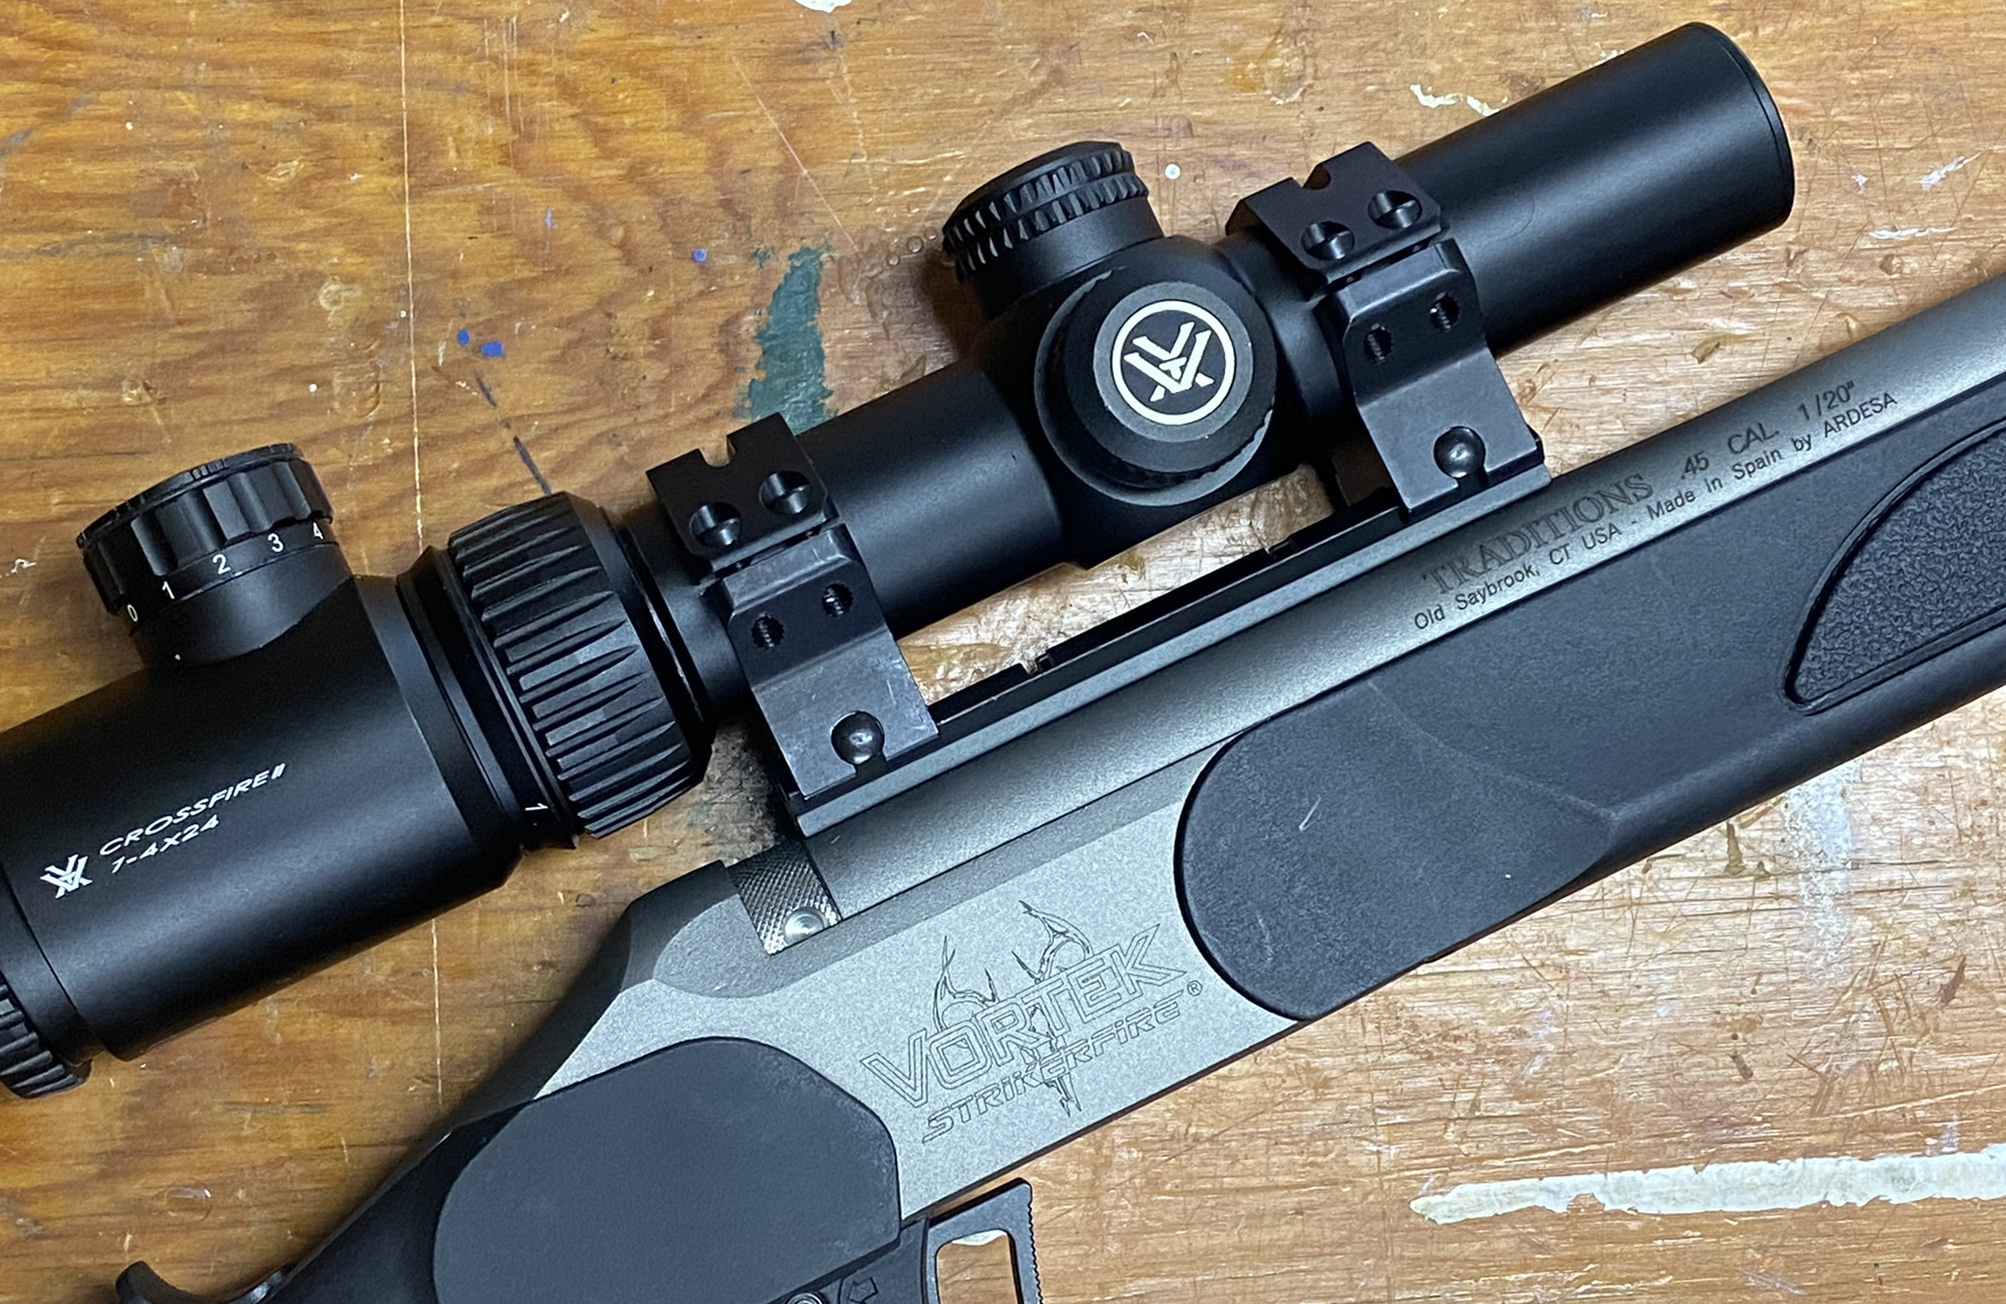 The Vortex Crossfire is a compact scope.